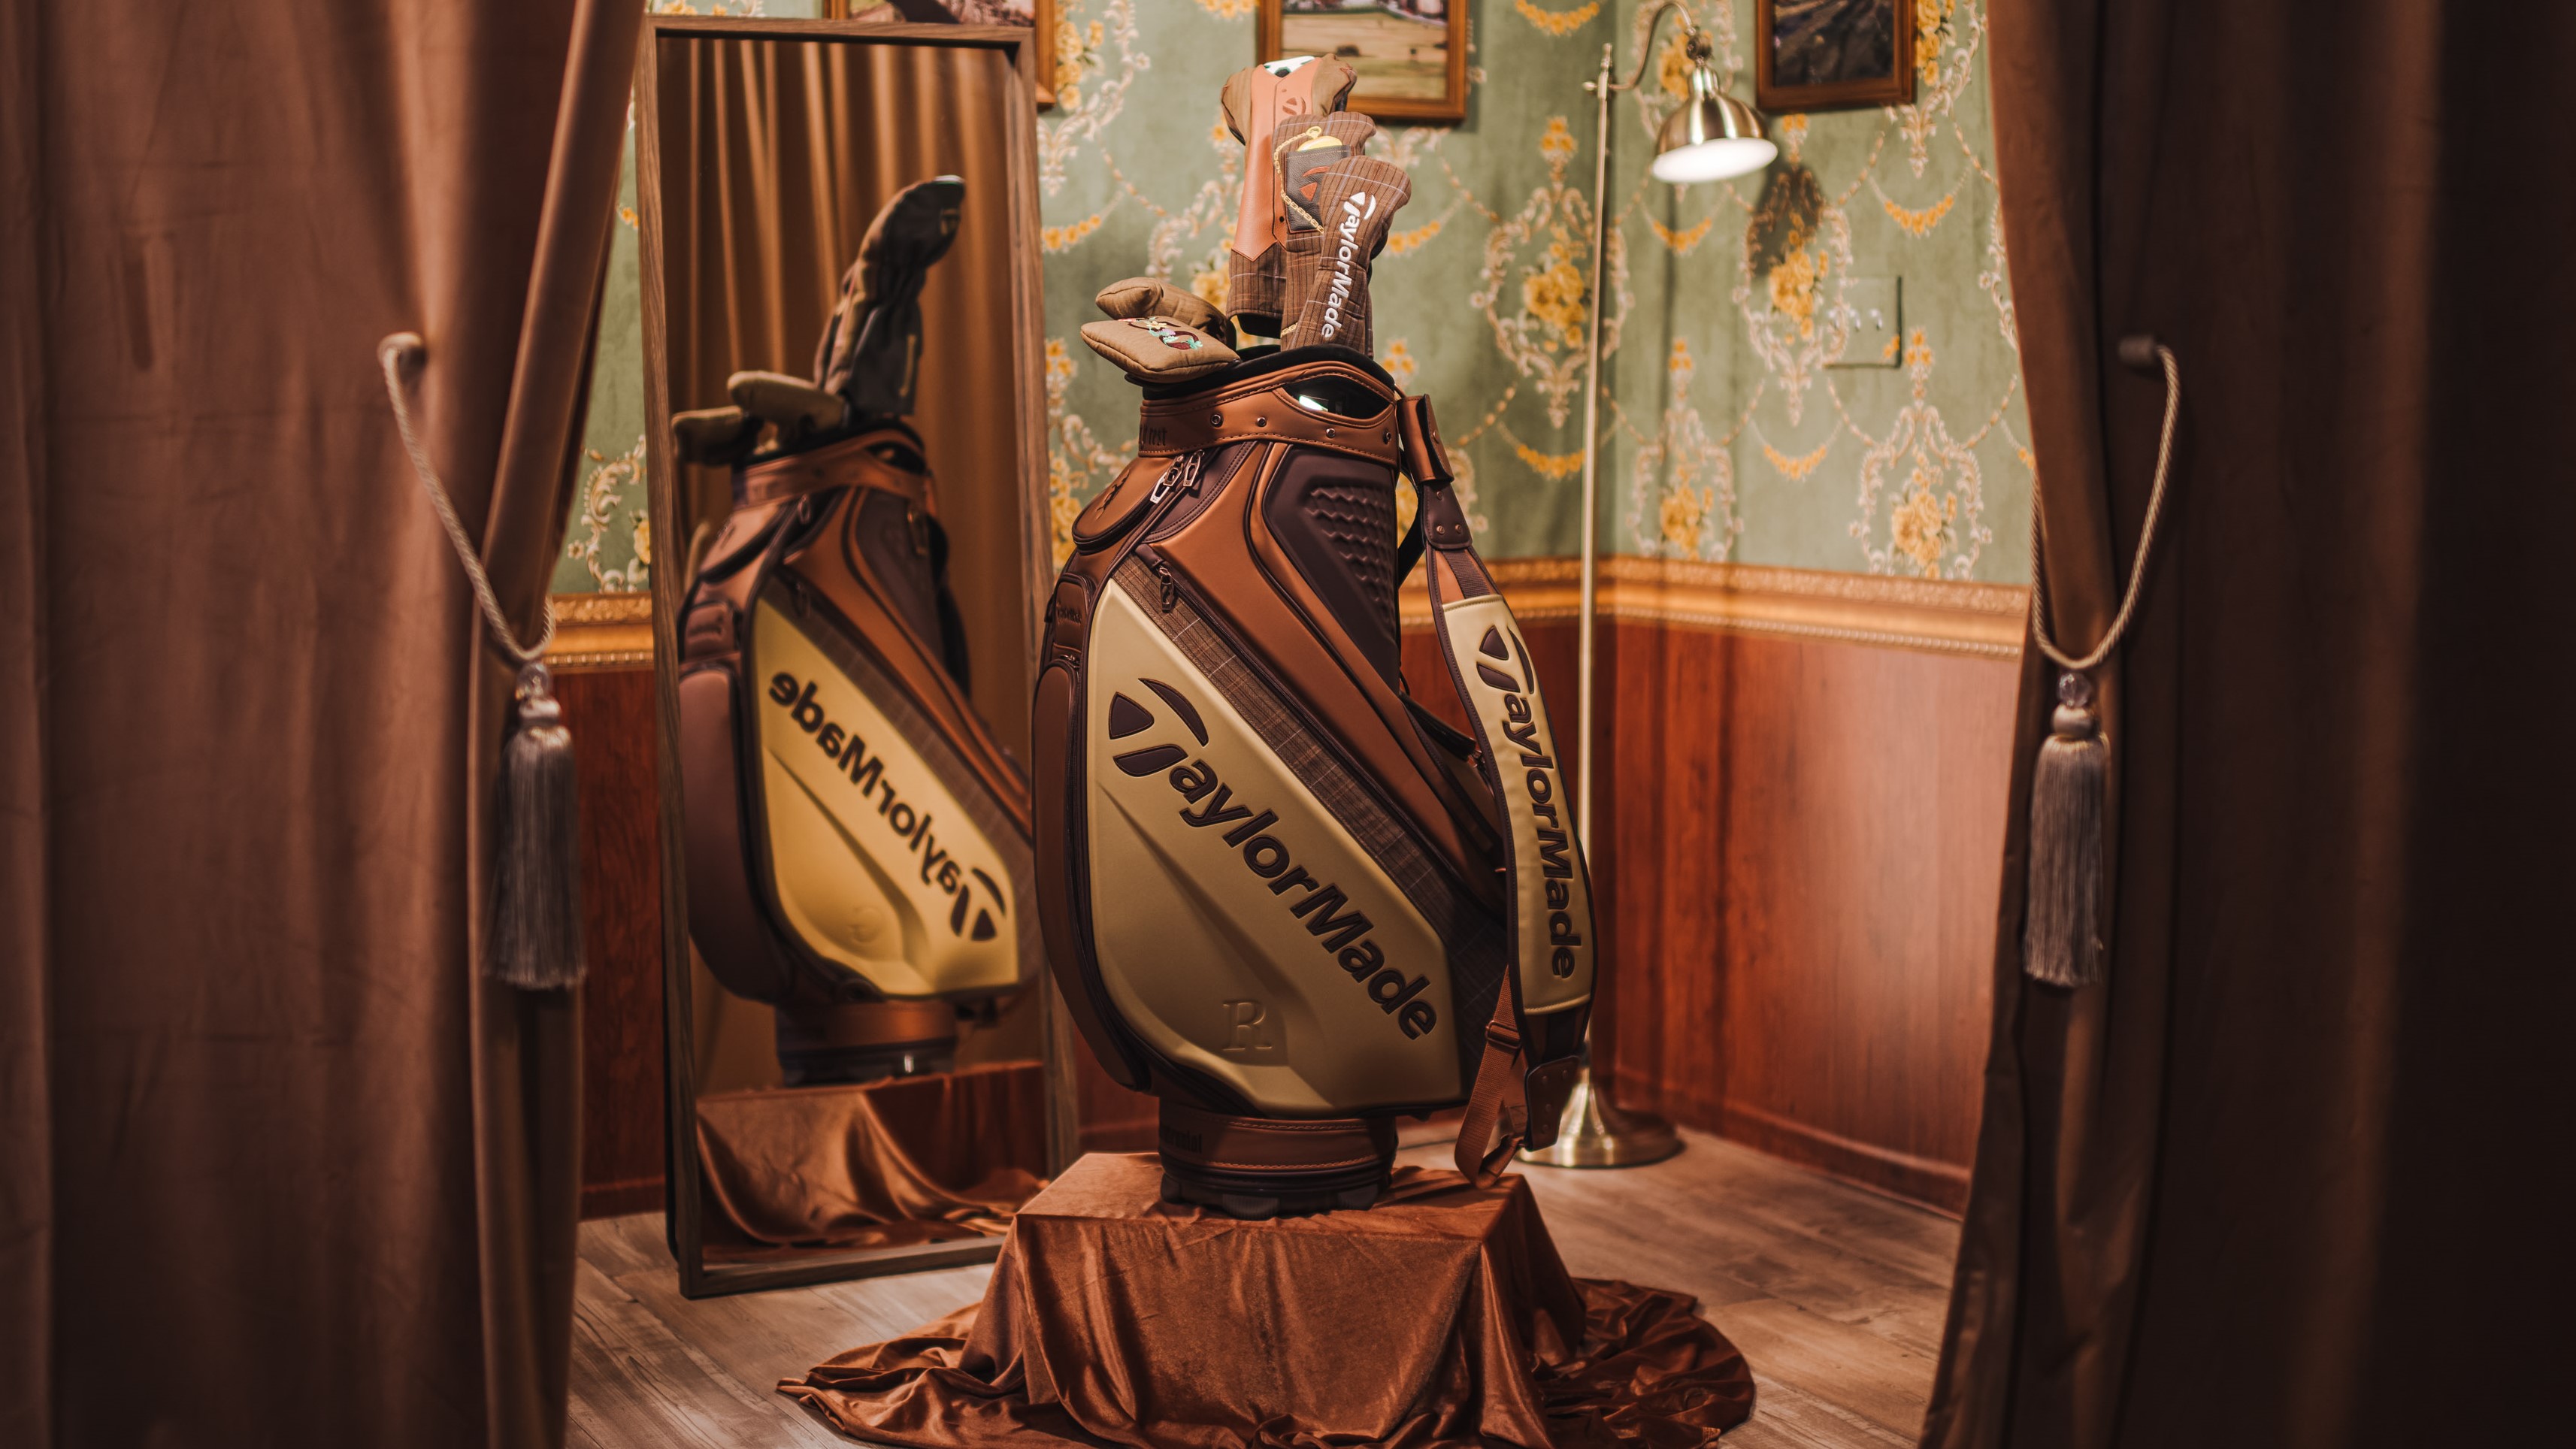 WIN! A limited edition TaylorMade bag